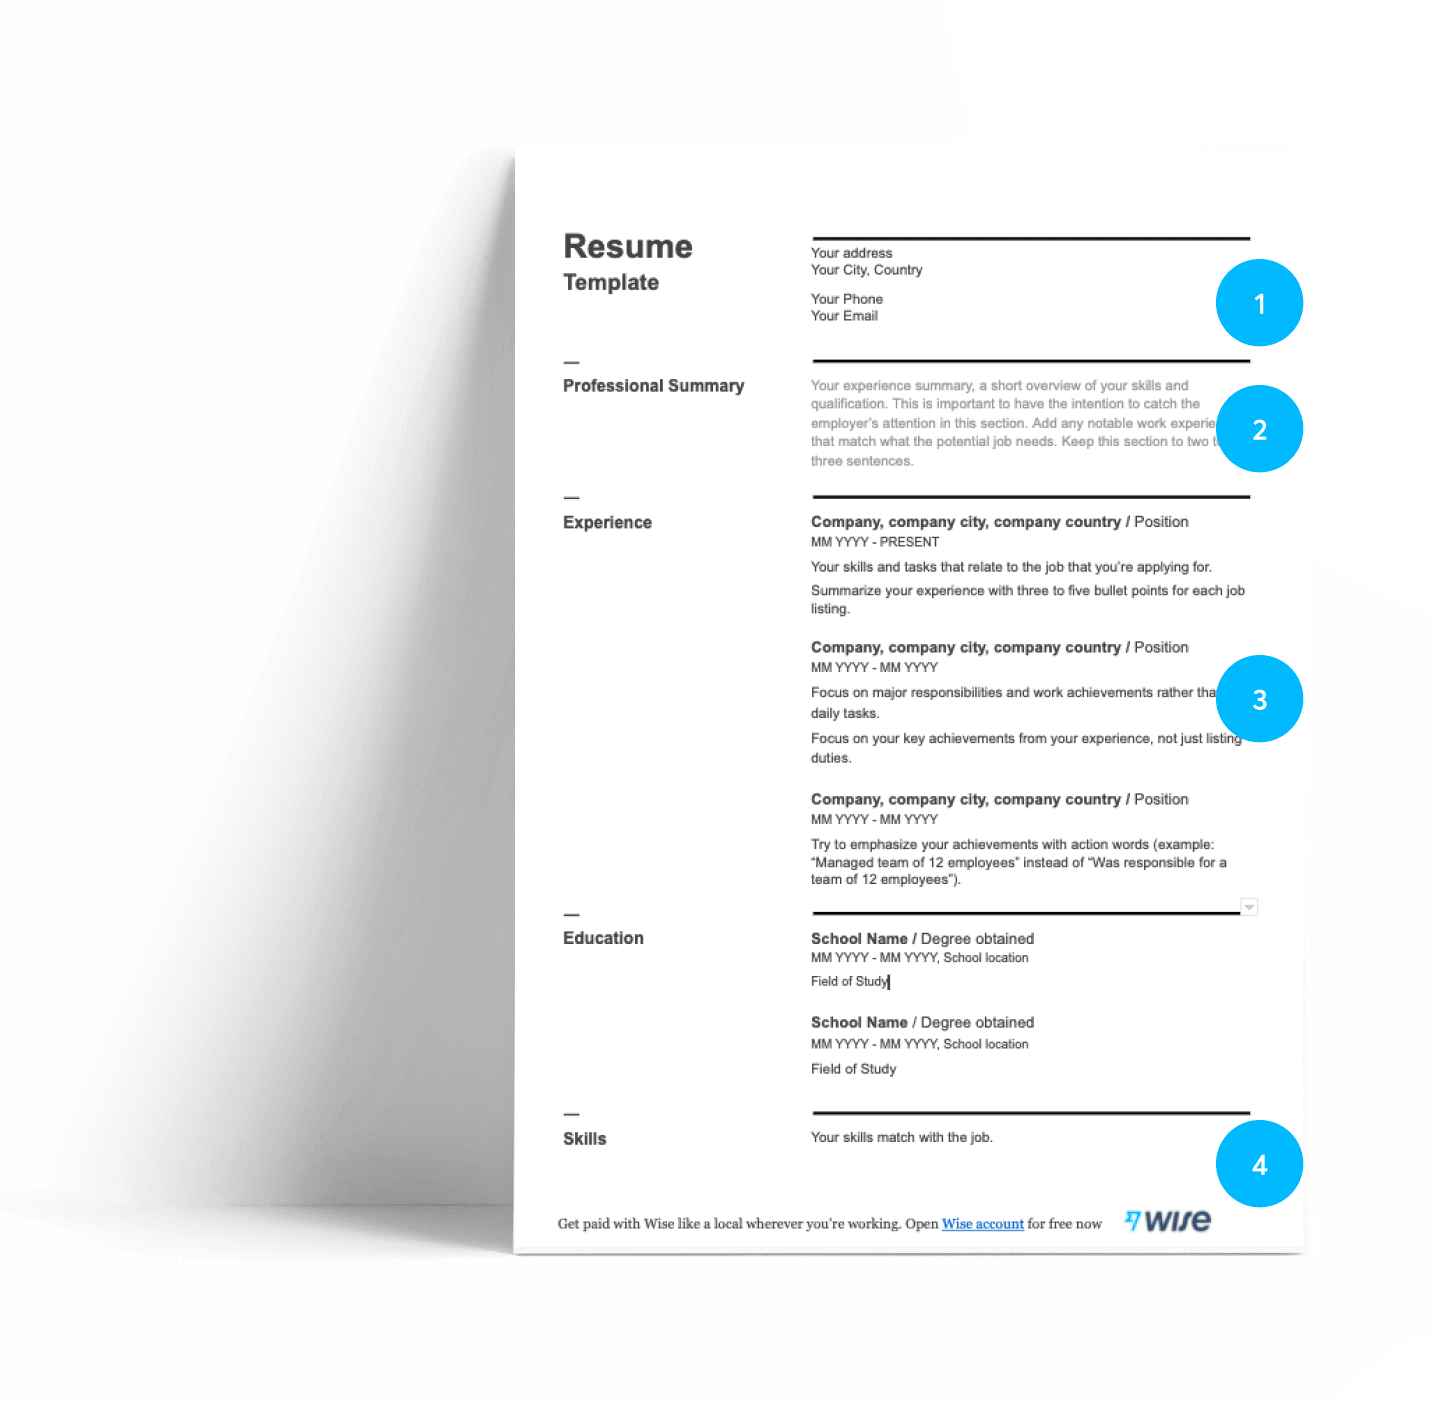 How to write a an IT resume?